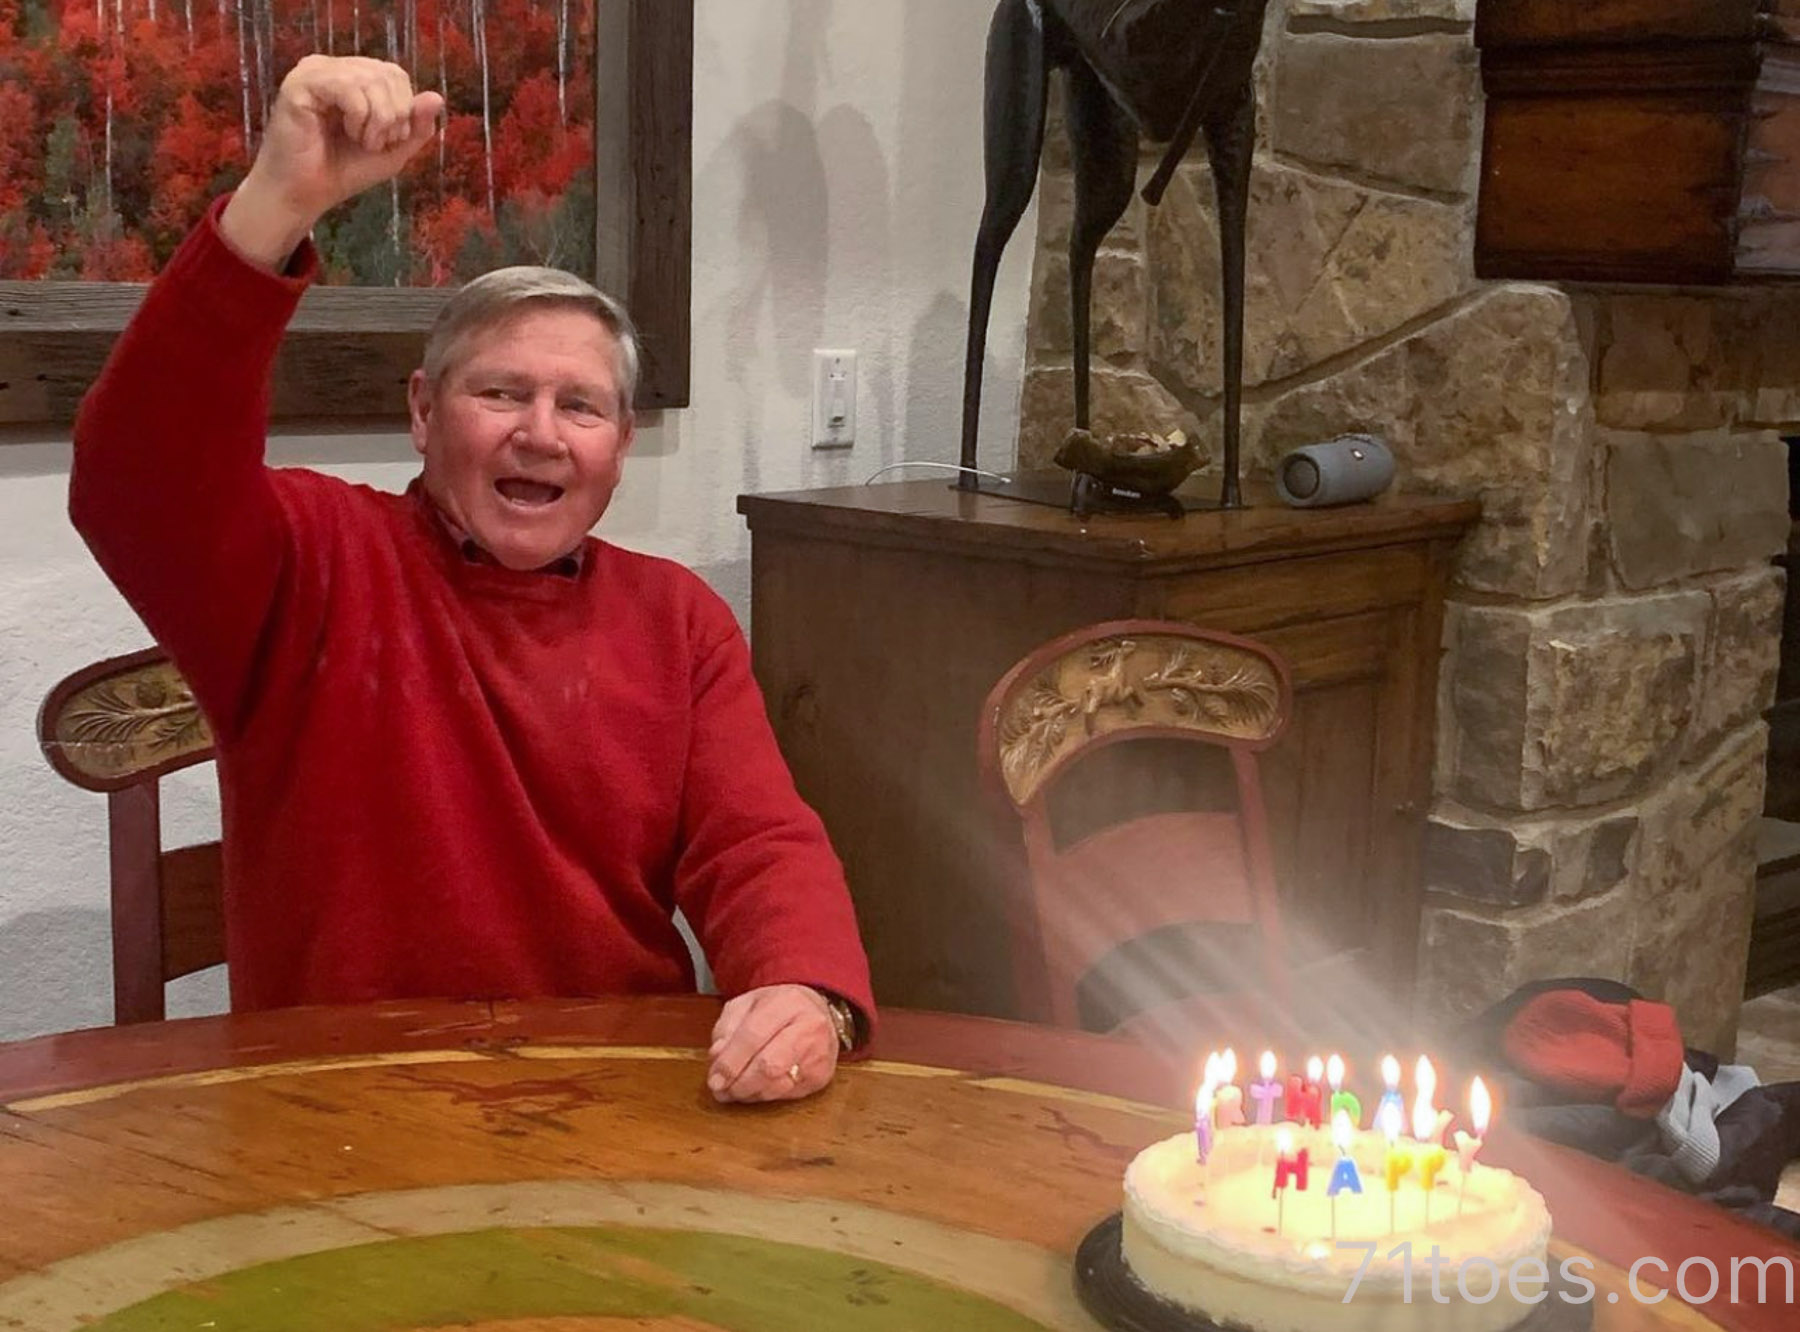 an 80th birthday for a man full of light